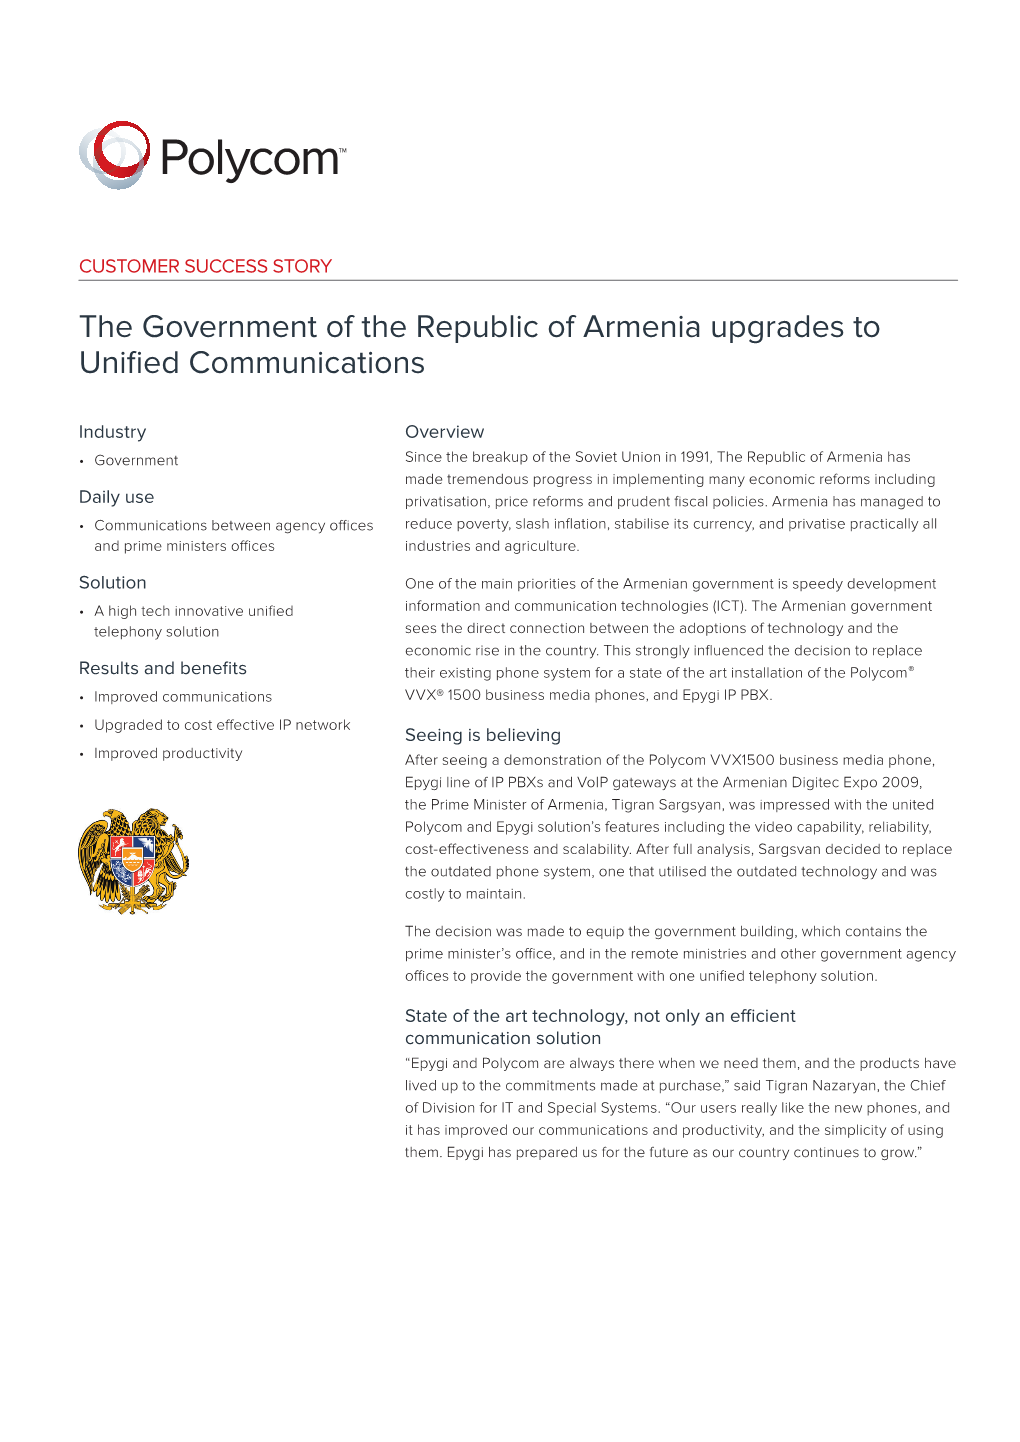 The Government of the Republic of Armenia Upgrades to Unified Communications